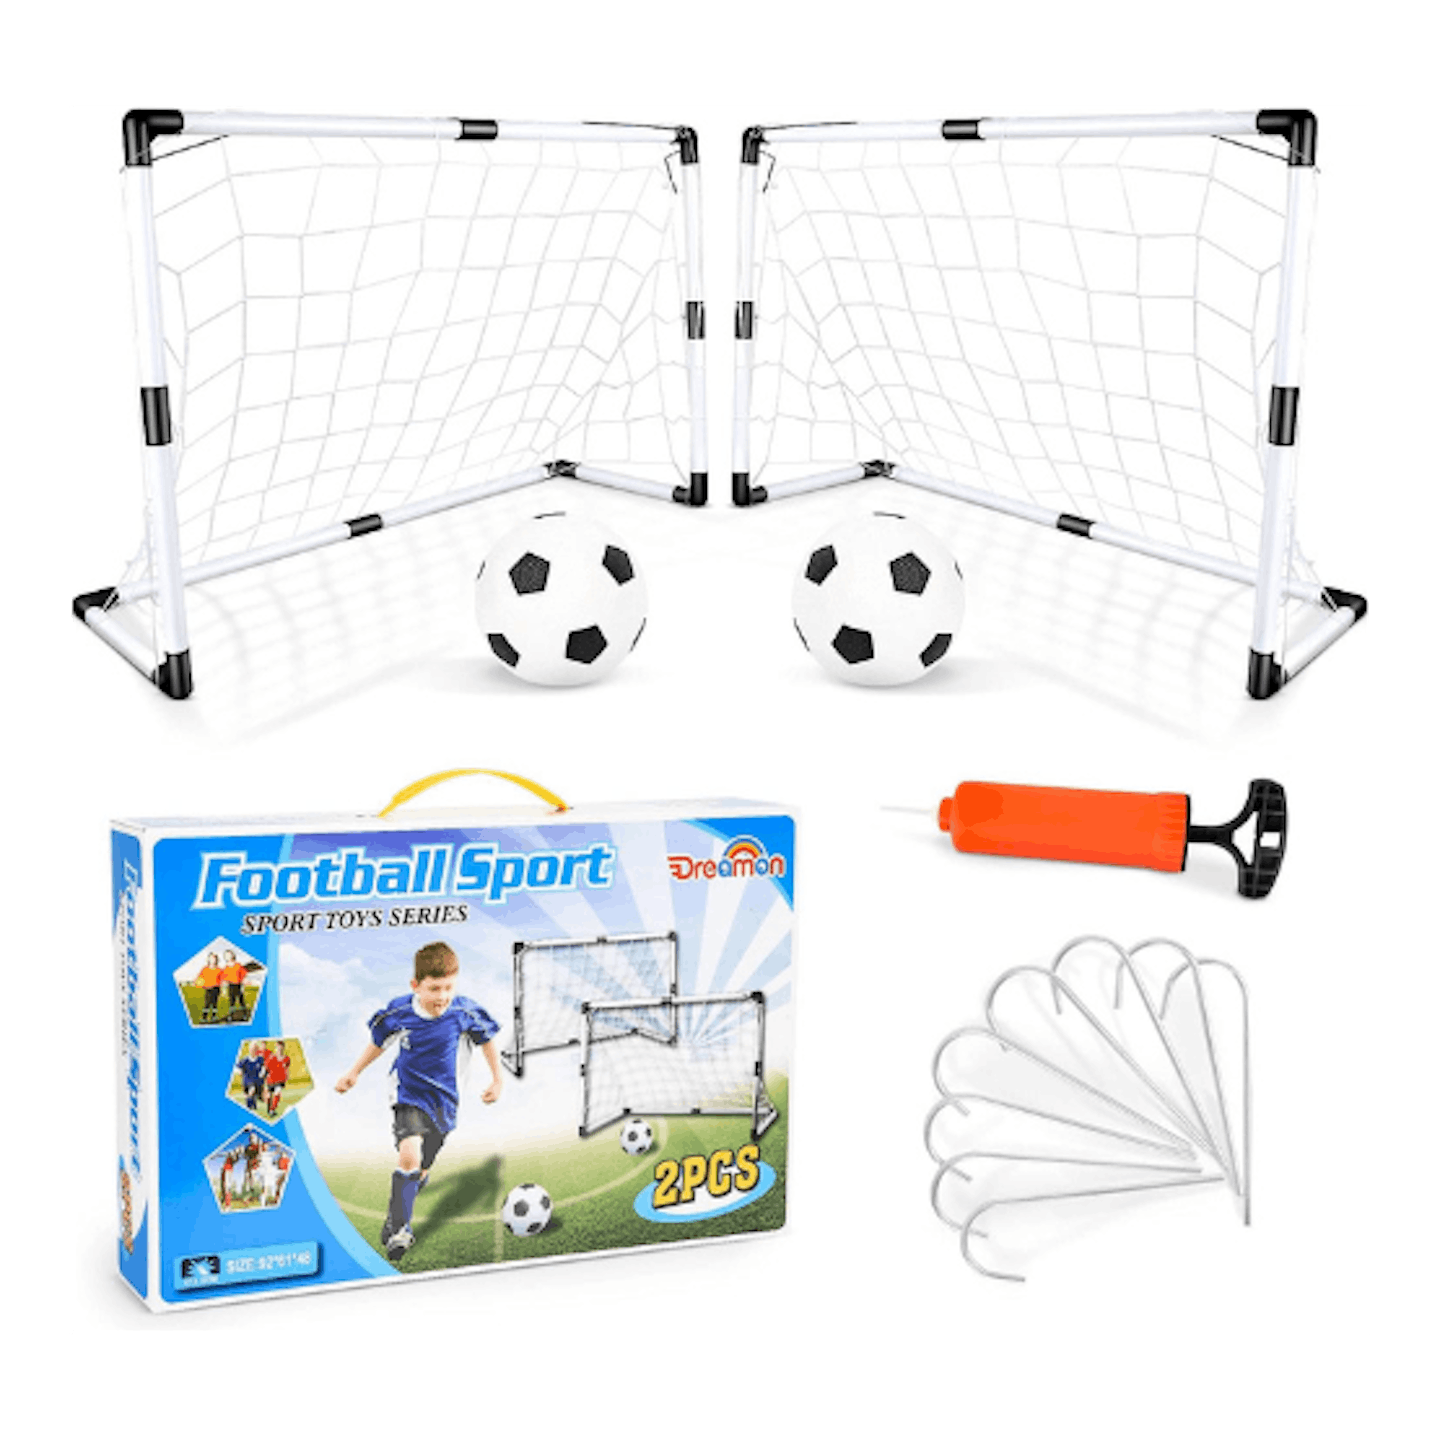 Best toys for 3-year-olds football goals